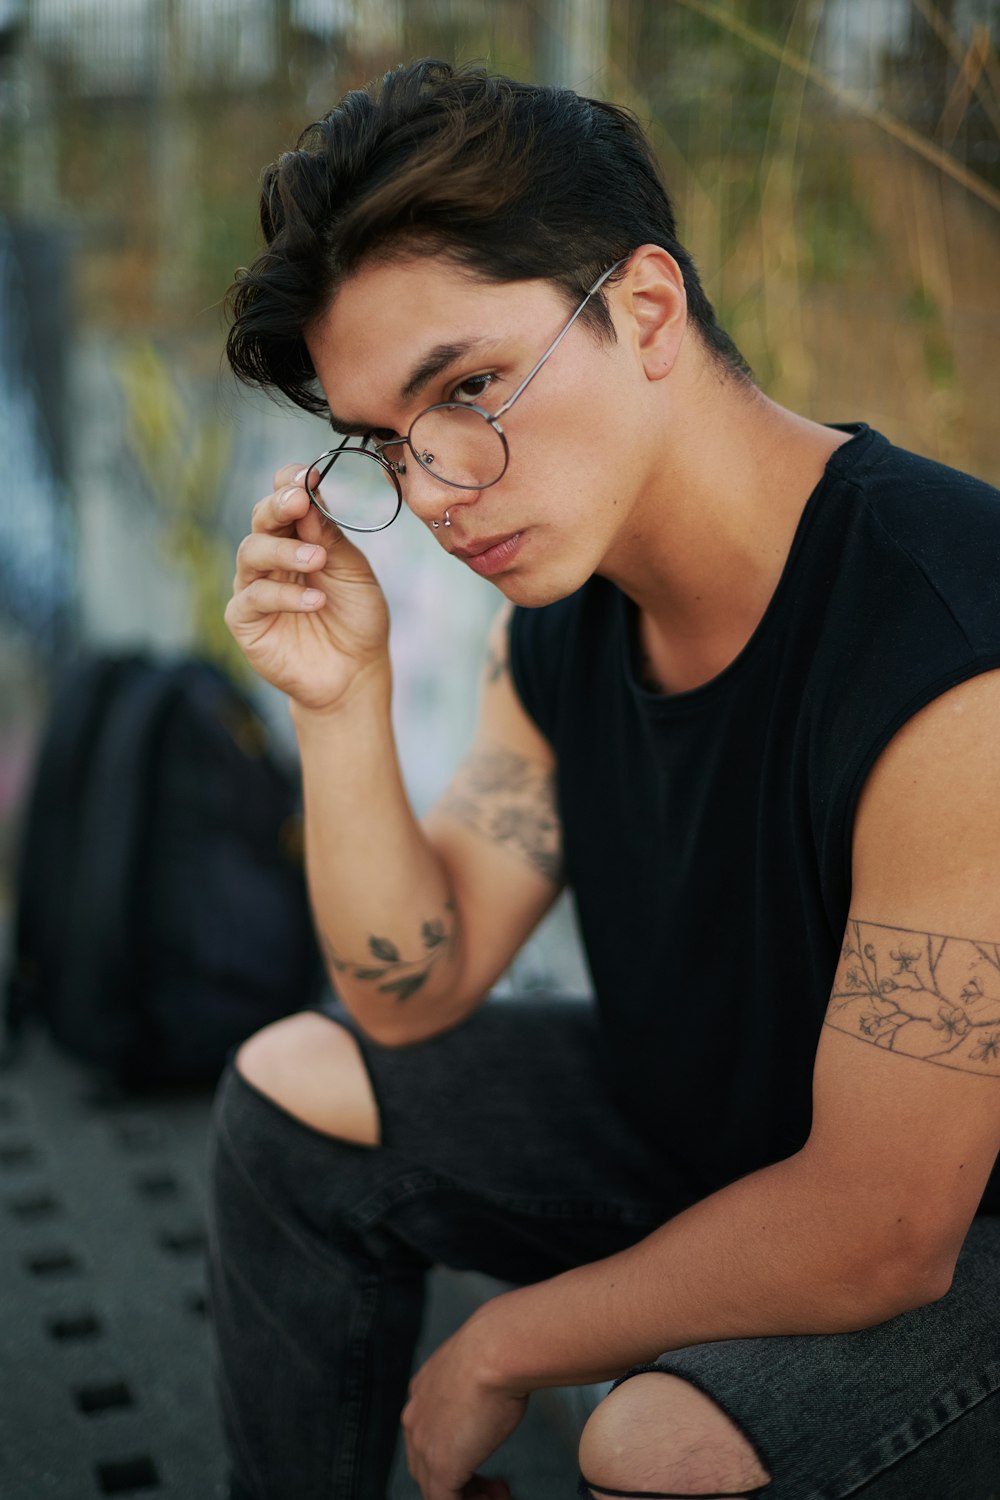 a man with a tattoo on his arm and glasses